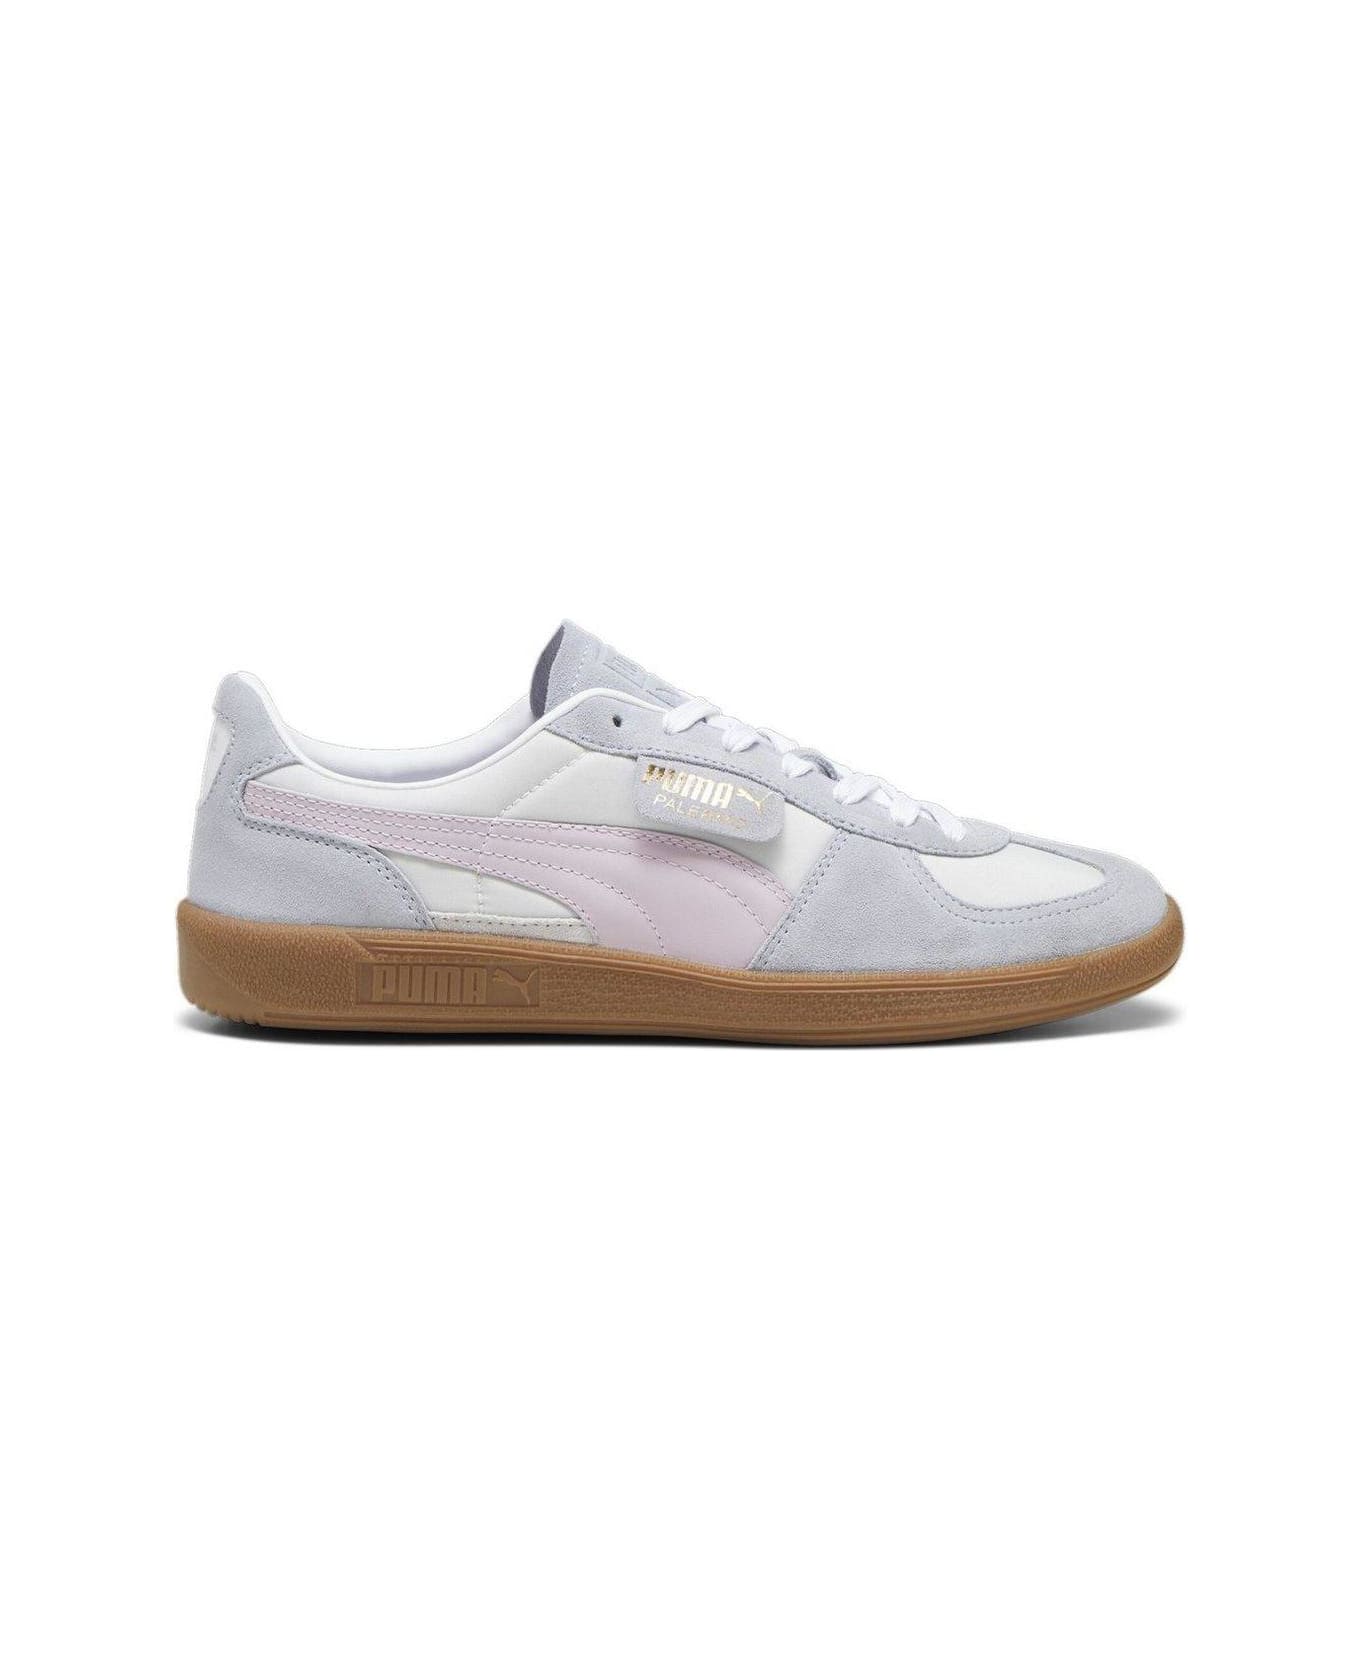 Puma Palermo Og Lace-up Sneakers - Pink